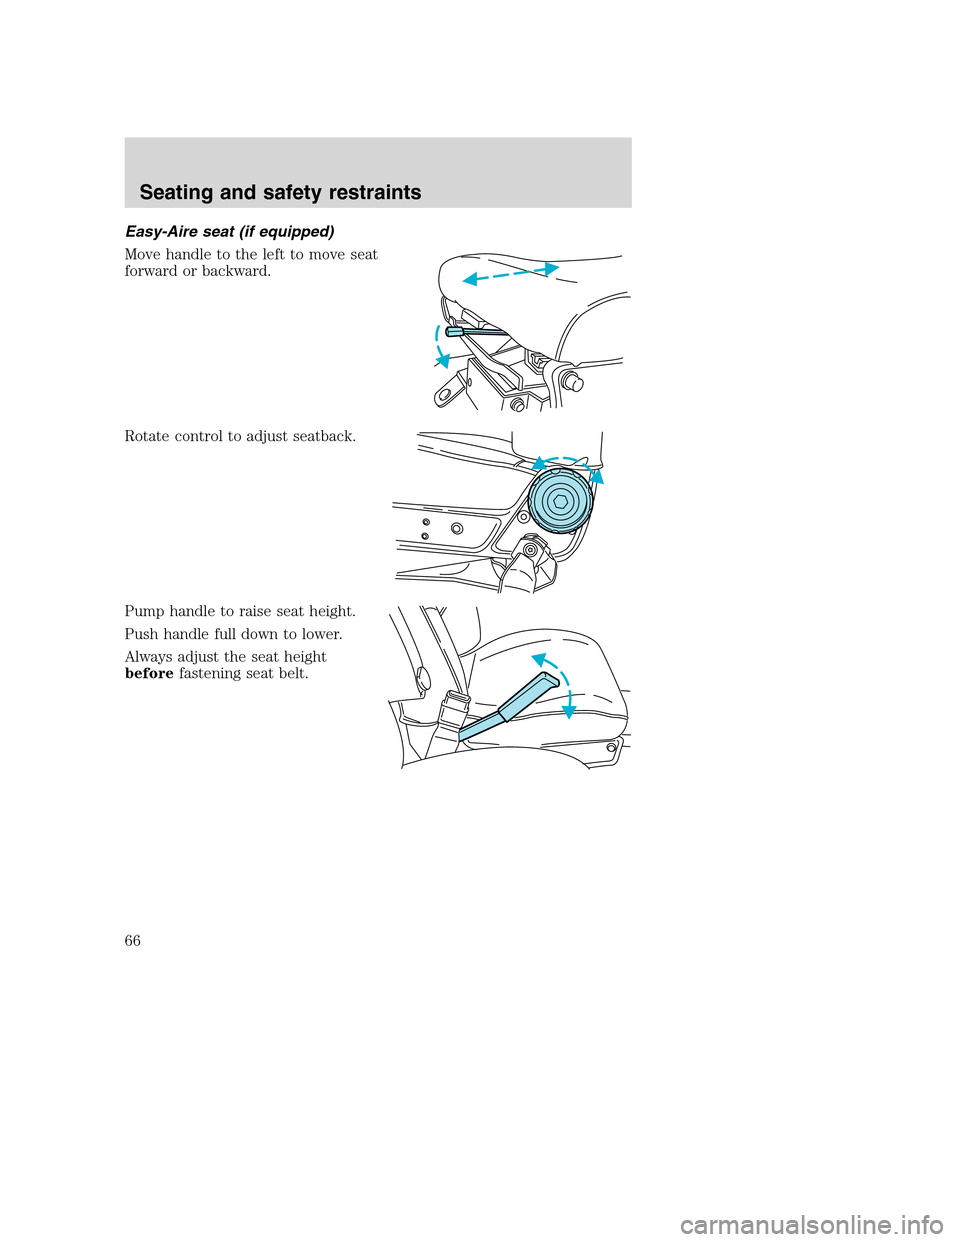 FORD F650 2005 11.G Repair Manual Easy-Aire seat (if equipped)
Move handle to the left to move seat
forward or backward.
Rotate control to adjust seatback.
Pump handle to raise seat height.
Push handle full down to lower.
Always adjus